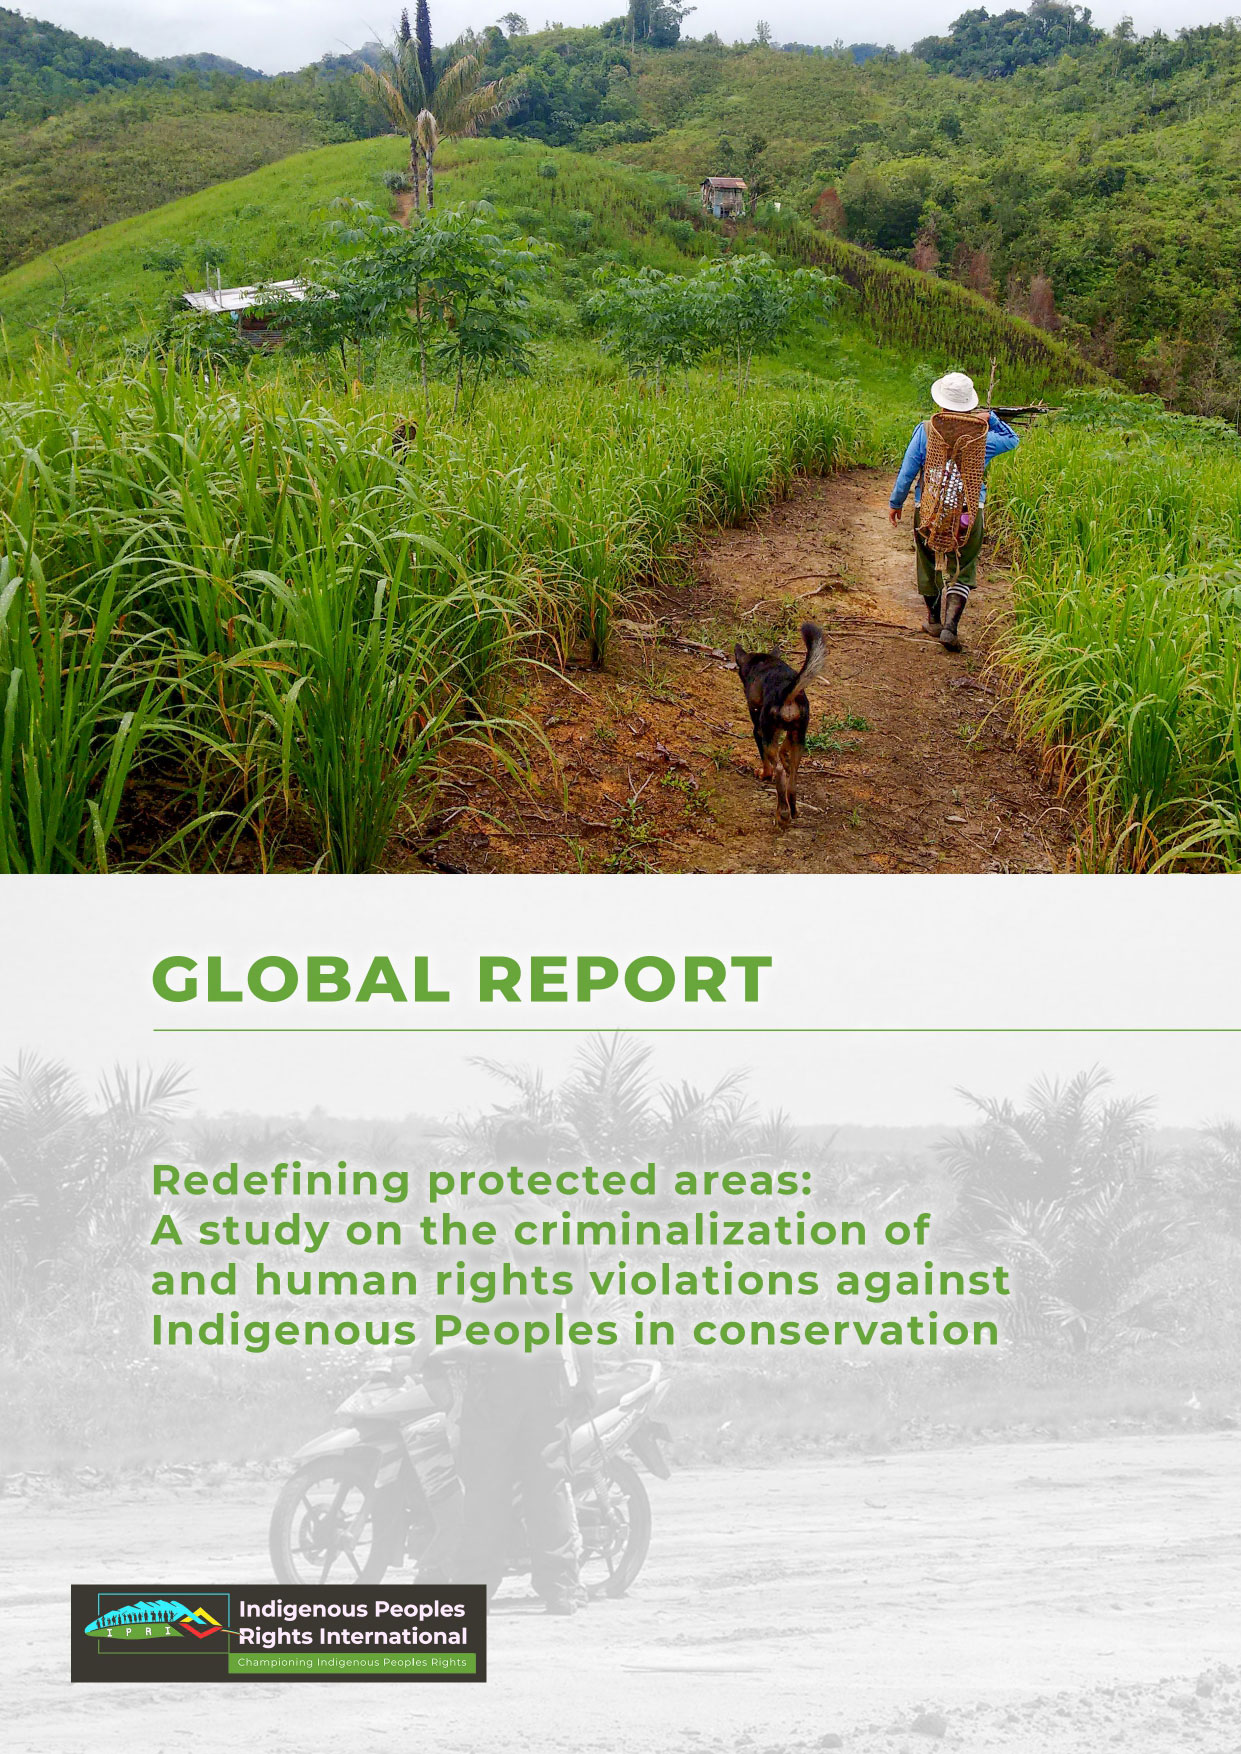 Global Report || Redefining Protected Areas: A Study on the Criminalization of and Human Rights Violations Against Indigenous Peoples in Conservation